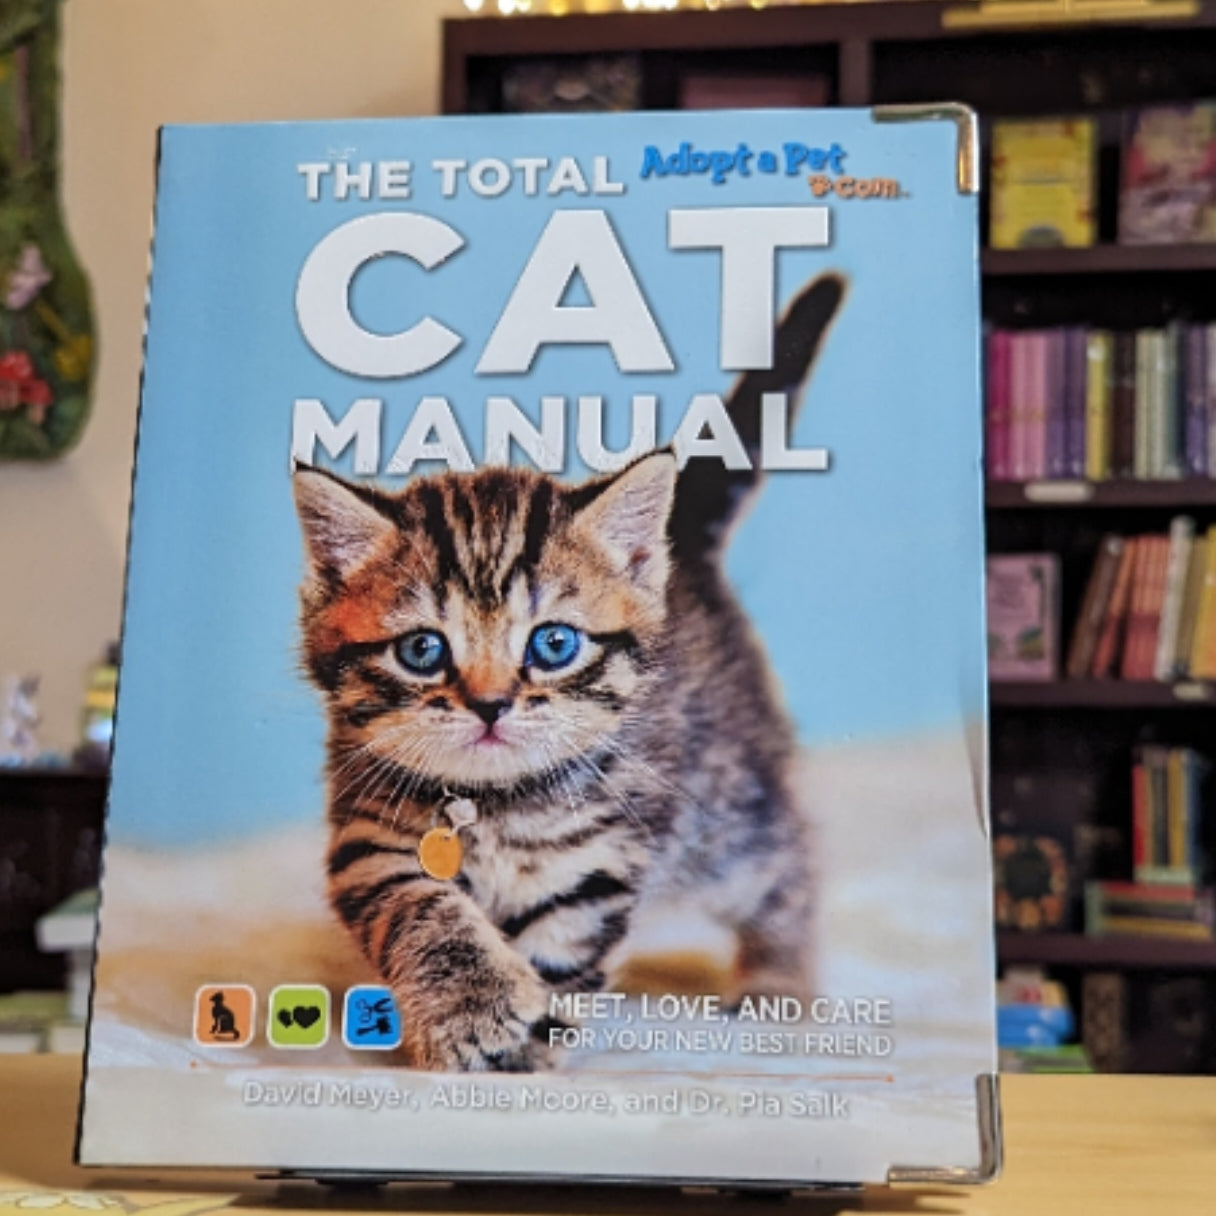 The Total Cat Manual: Meet, Love, and Care for Your New Best Friend